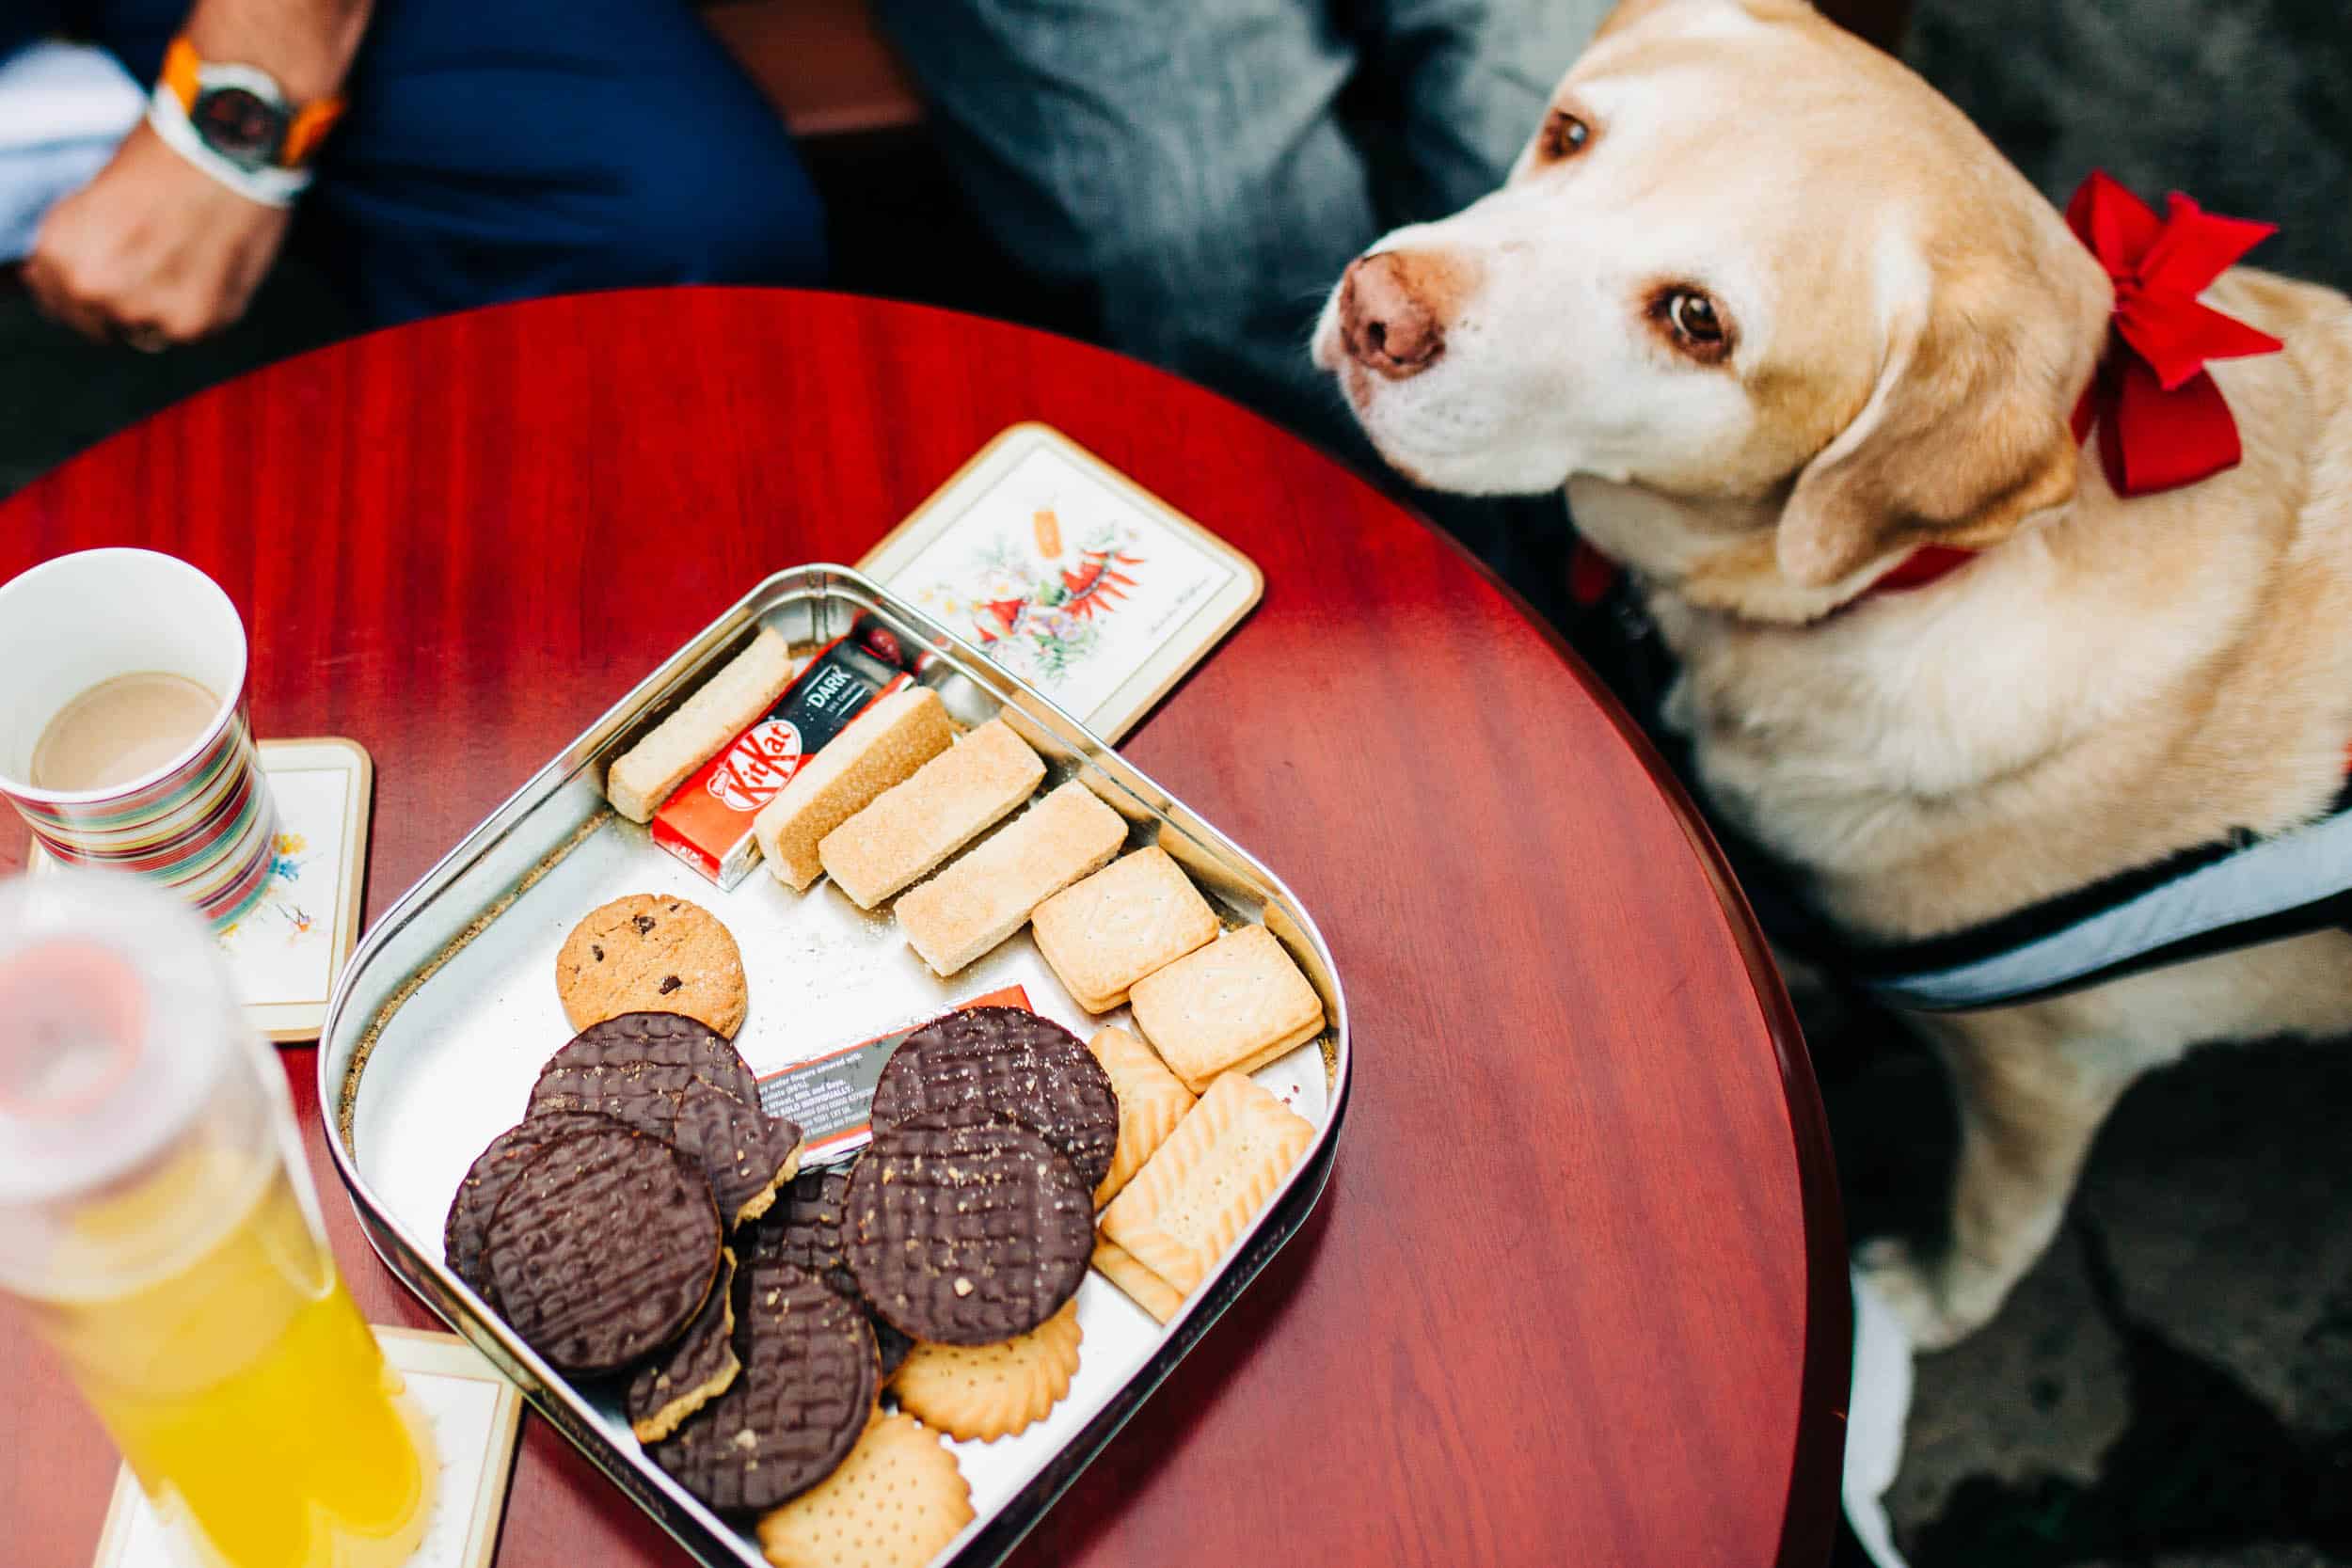 Veteran's Service Dog and biscuits